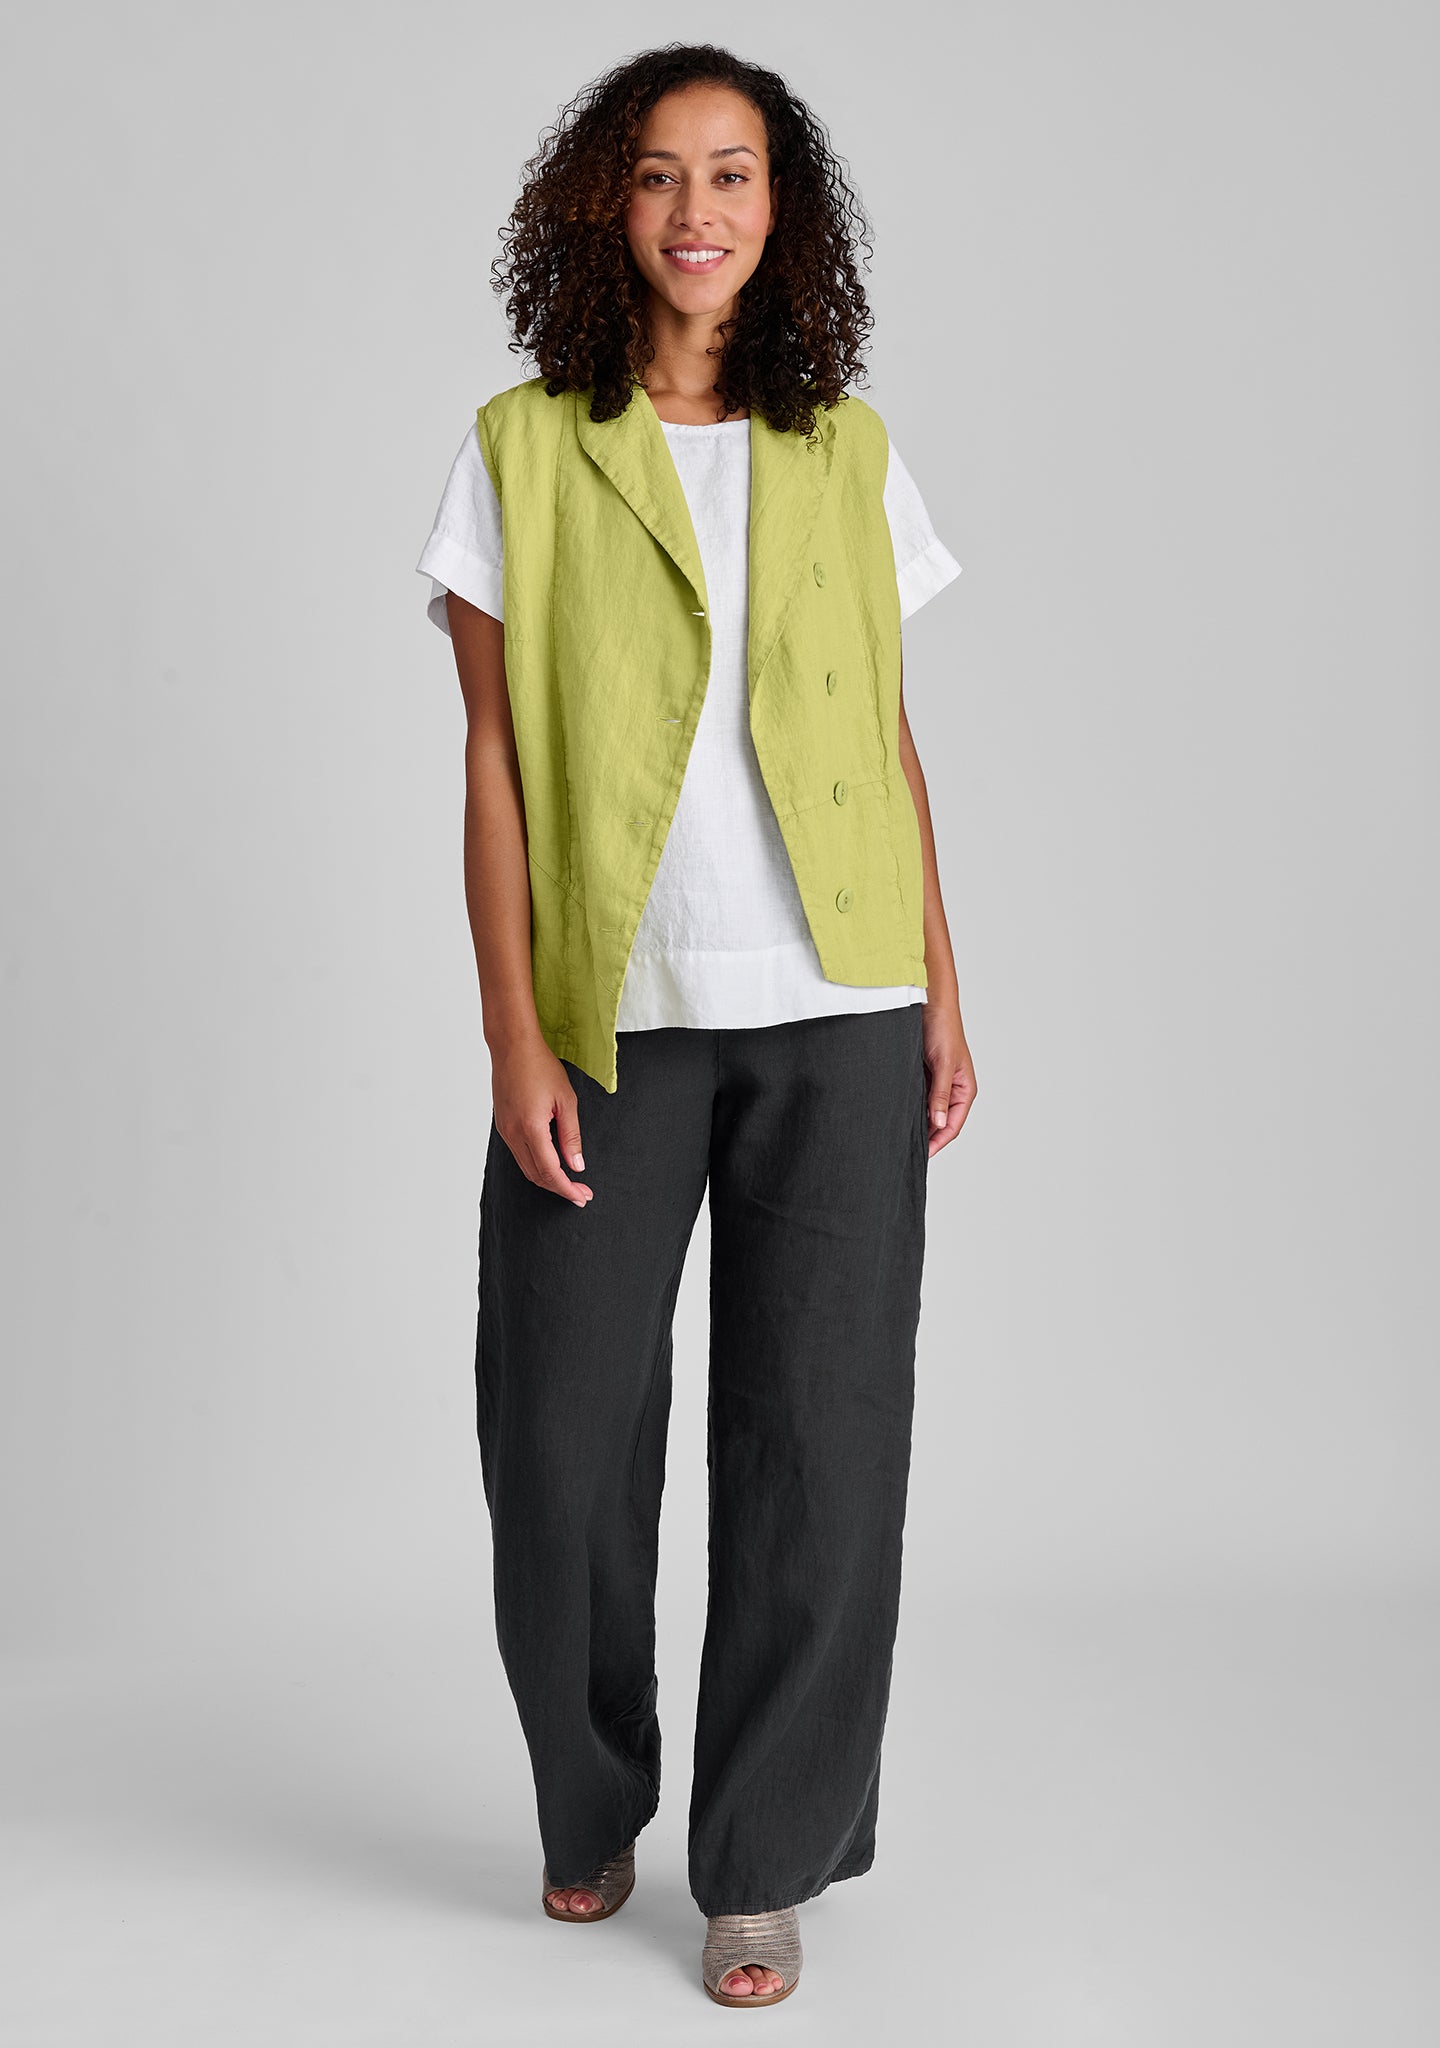 FLAX linen vest in green with linen tee in white and linen pants in black